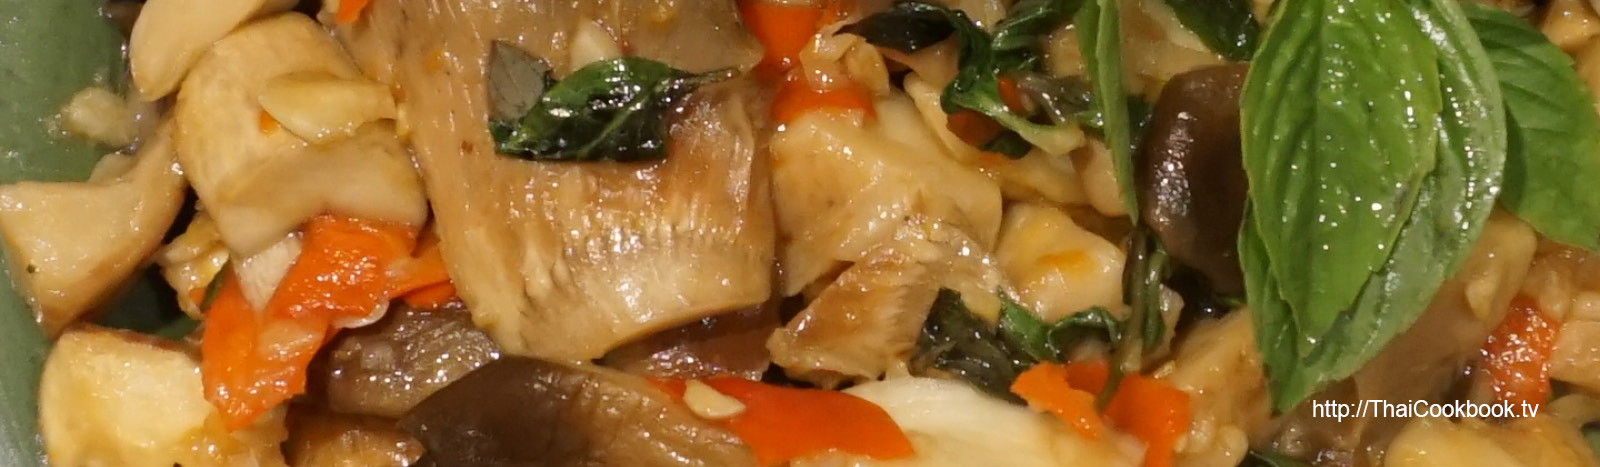 Authentic Thai recipe for Spicy Oyster Mushrooms with Sweet Basil